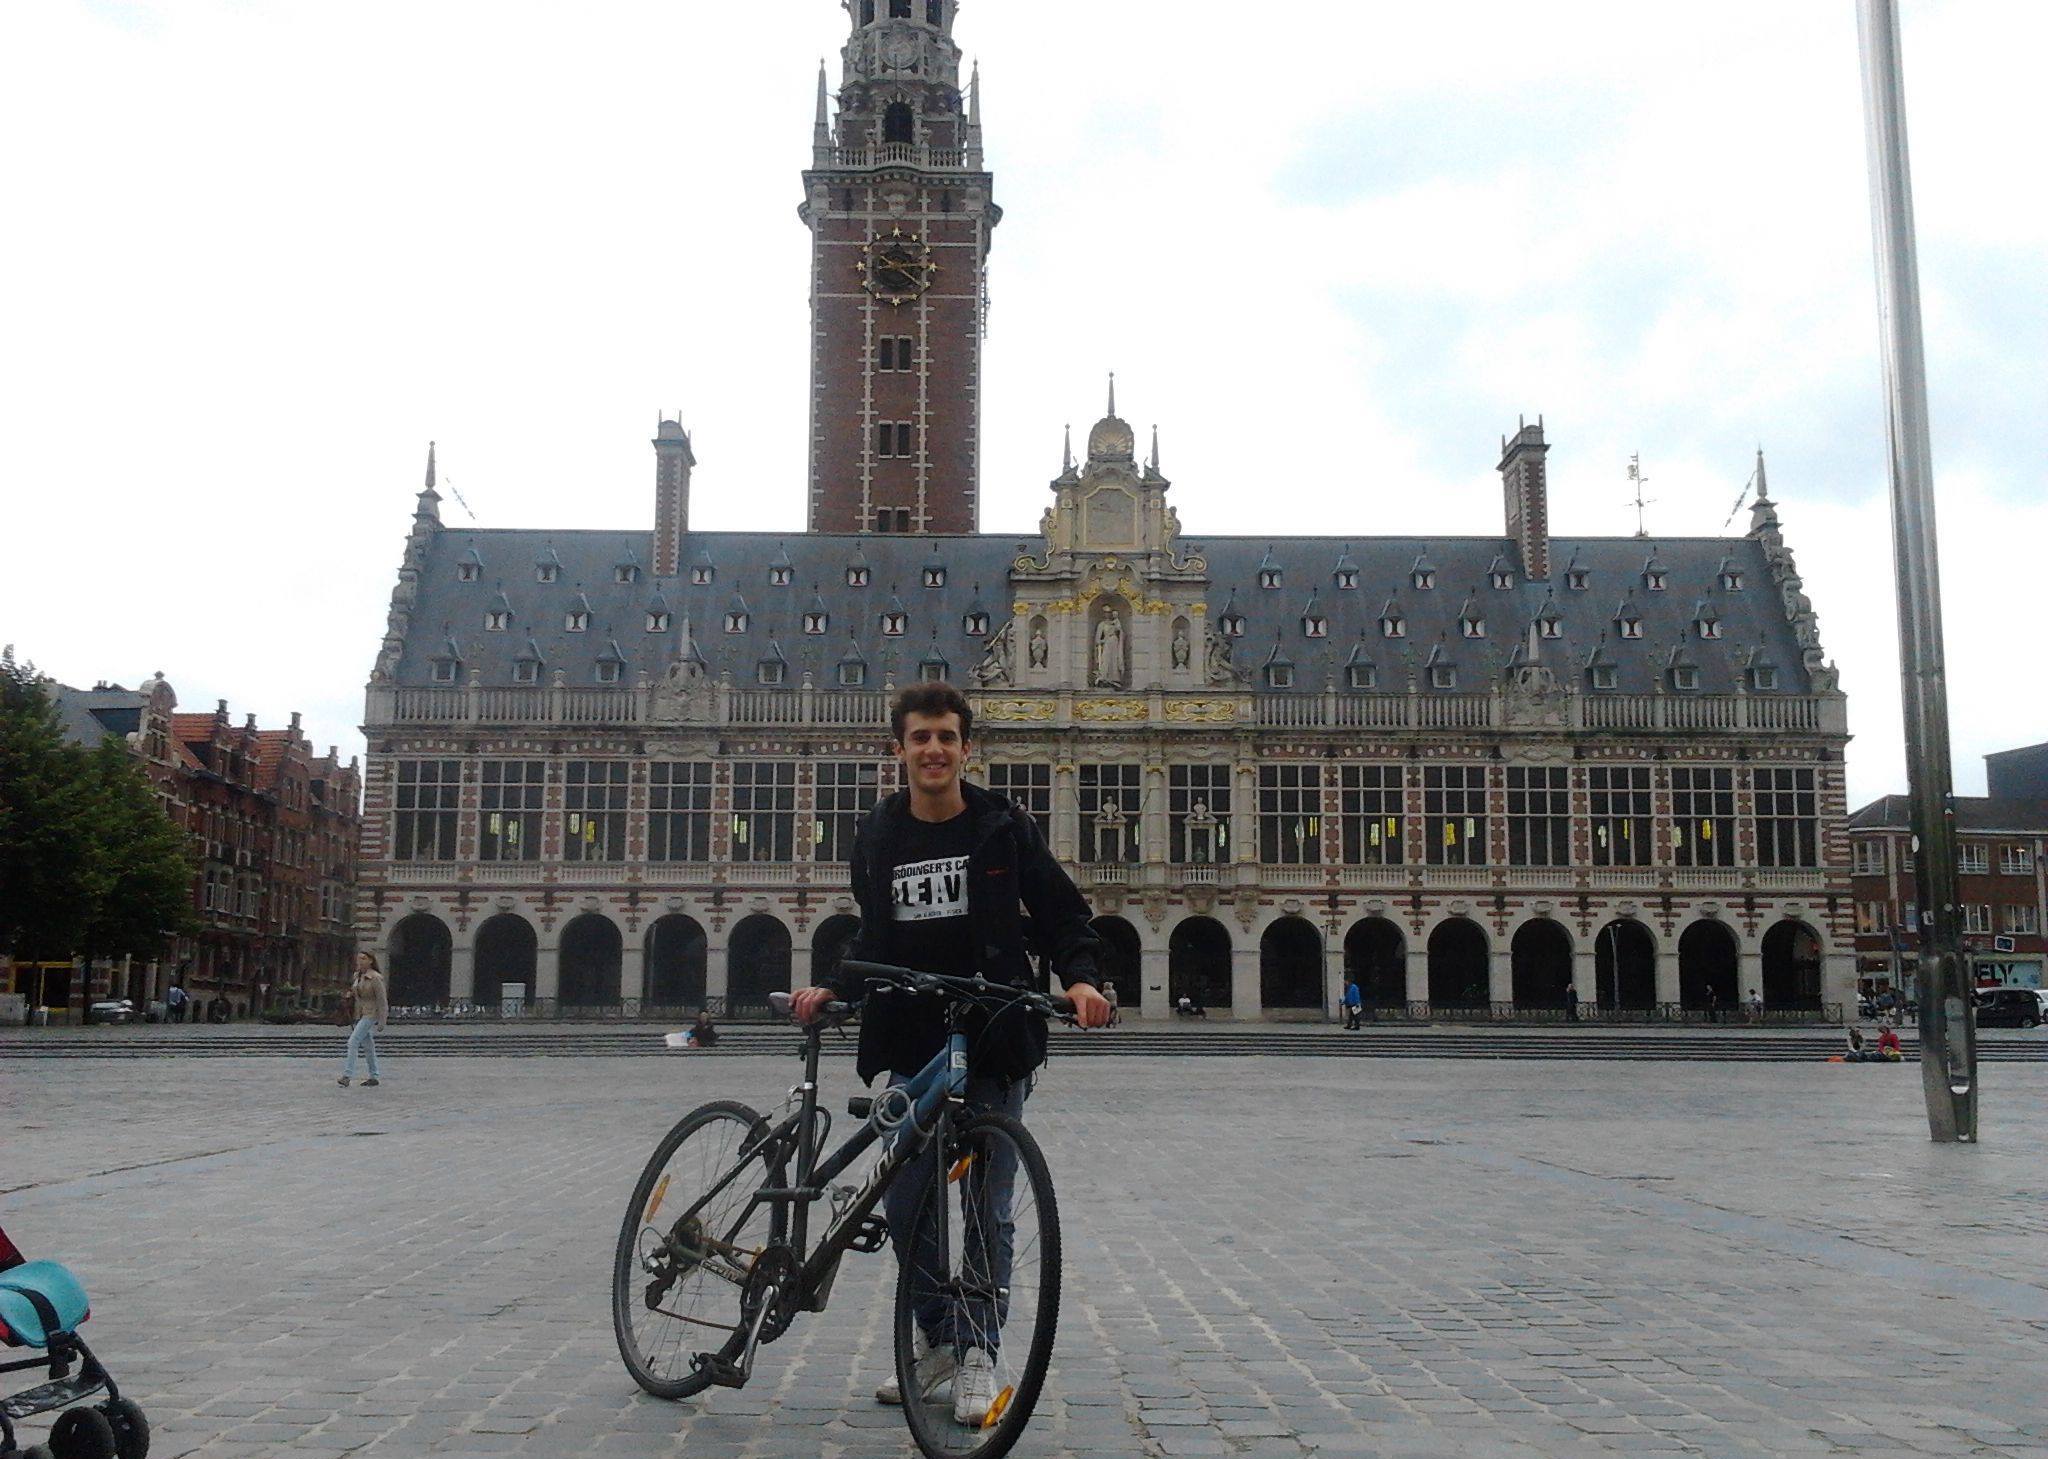  *Leuven (Belgium). July, 2013*: Before the course started, I went to Leuven to find a place to live during the year. Not only, I found the room, but also a nice bike that still waits for me when I go to Valladolid (Spain). This is the triumphant hunting picture with the prize.